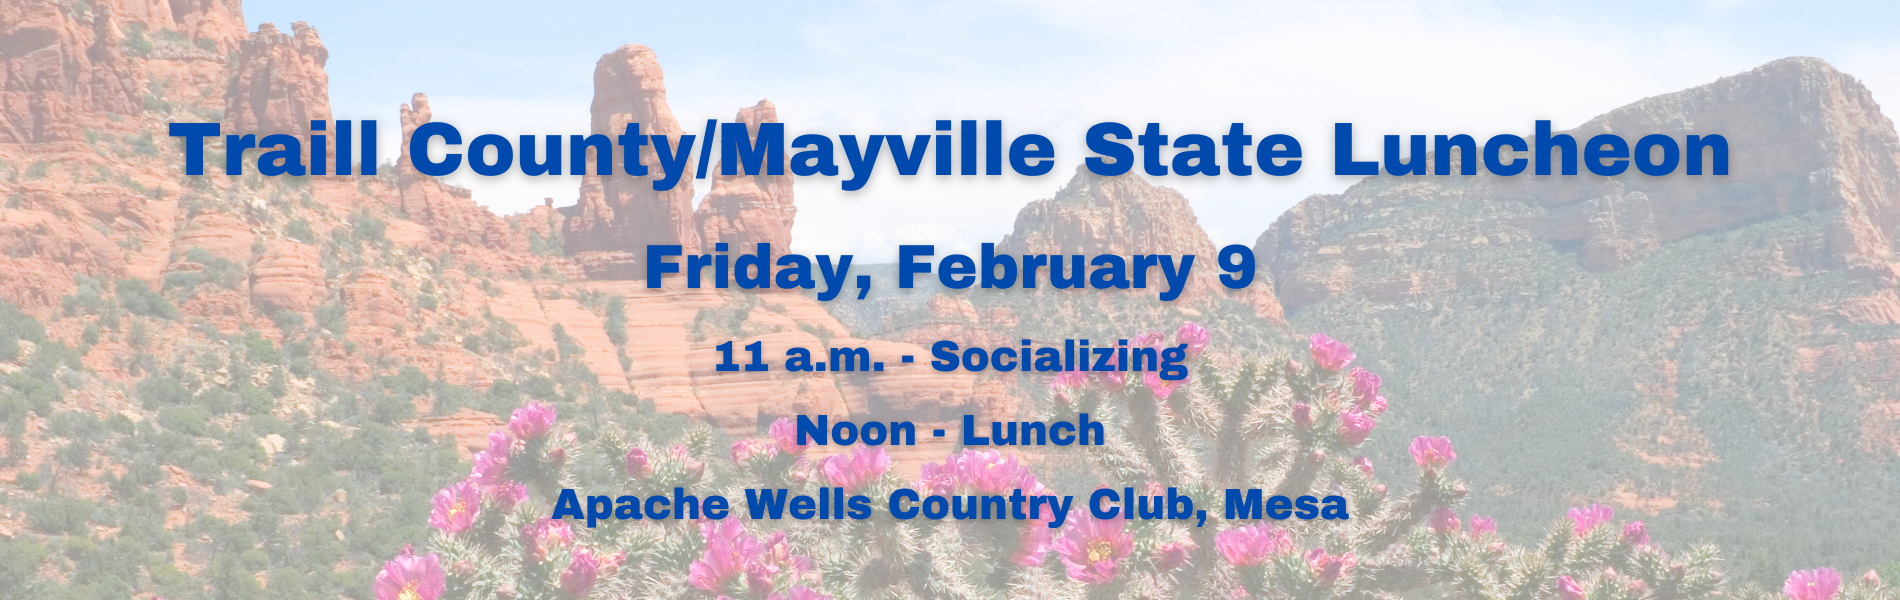 Traill CountyMayville State Luncheon 2023.png